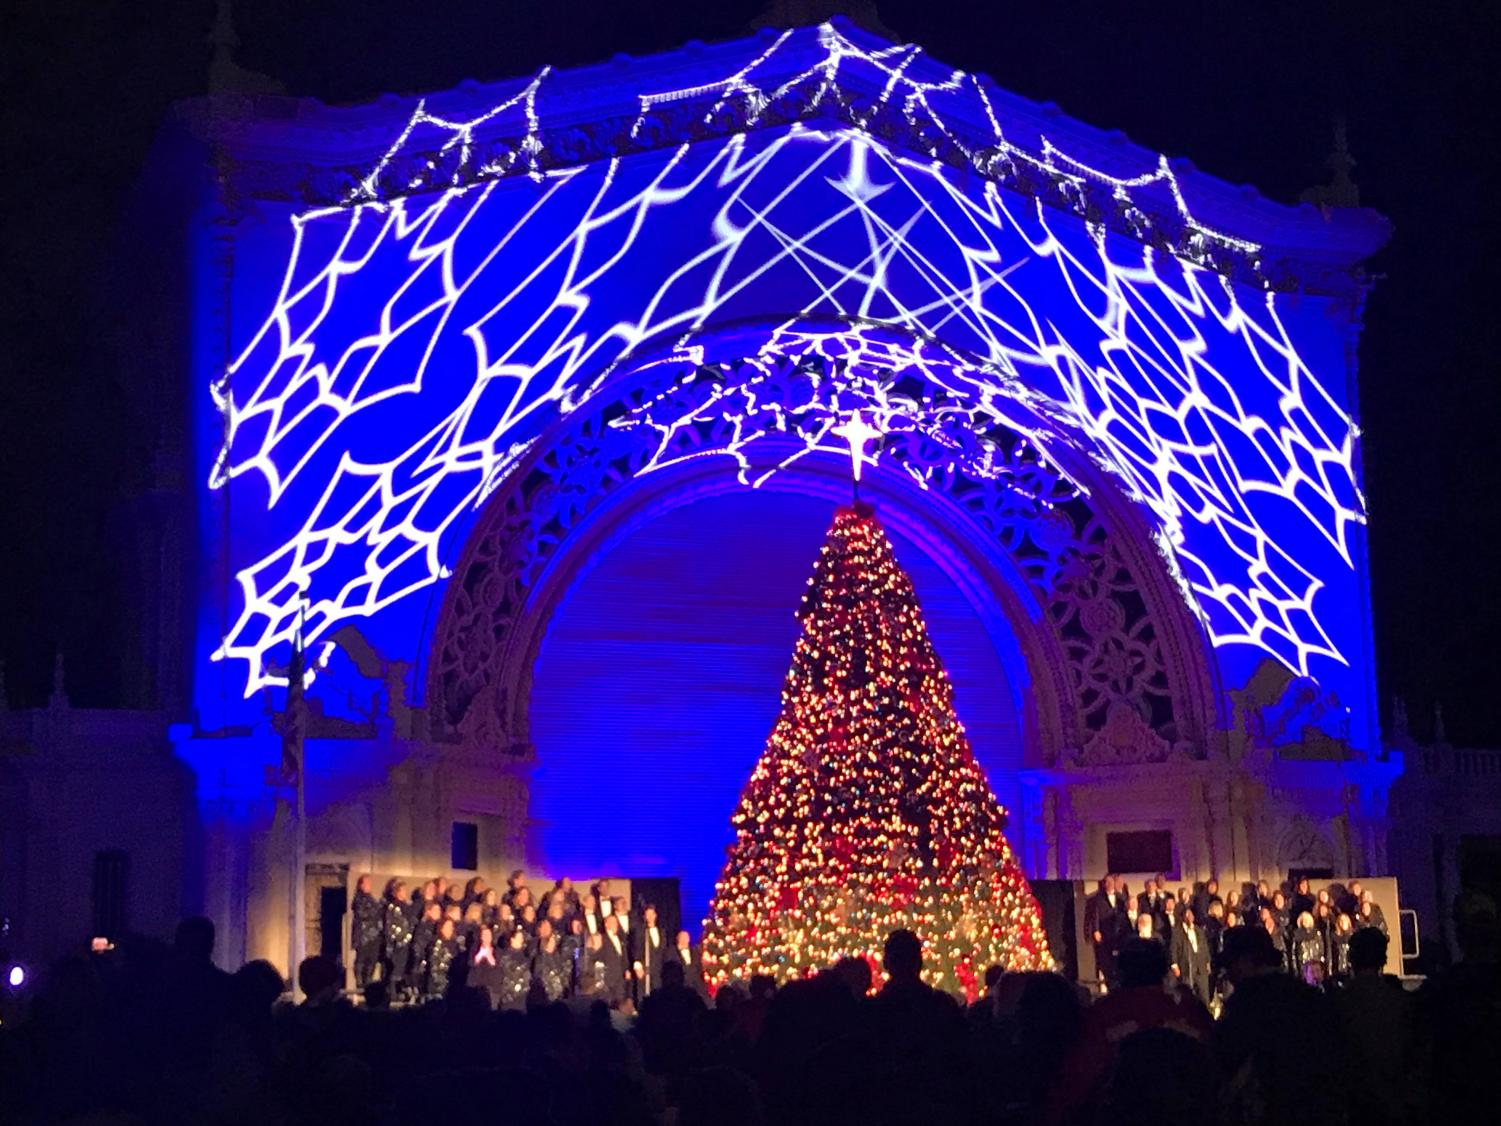 December Nights lights up Balboa Park s sky again The Daily Aztec